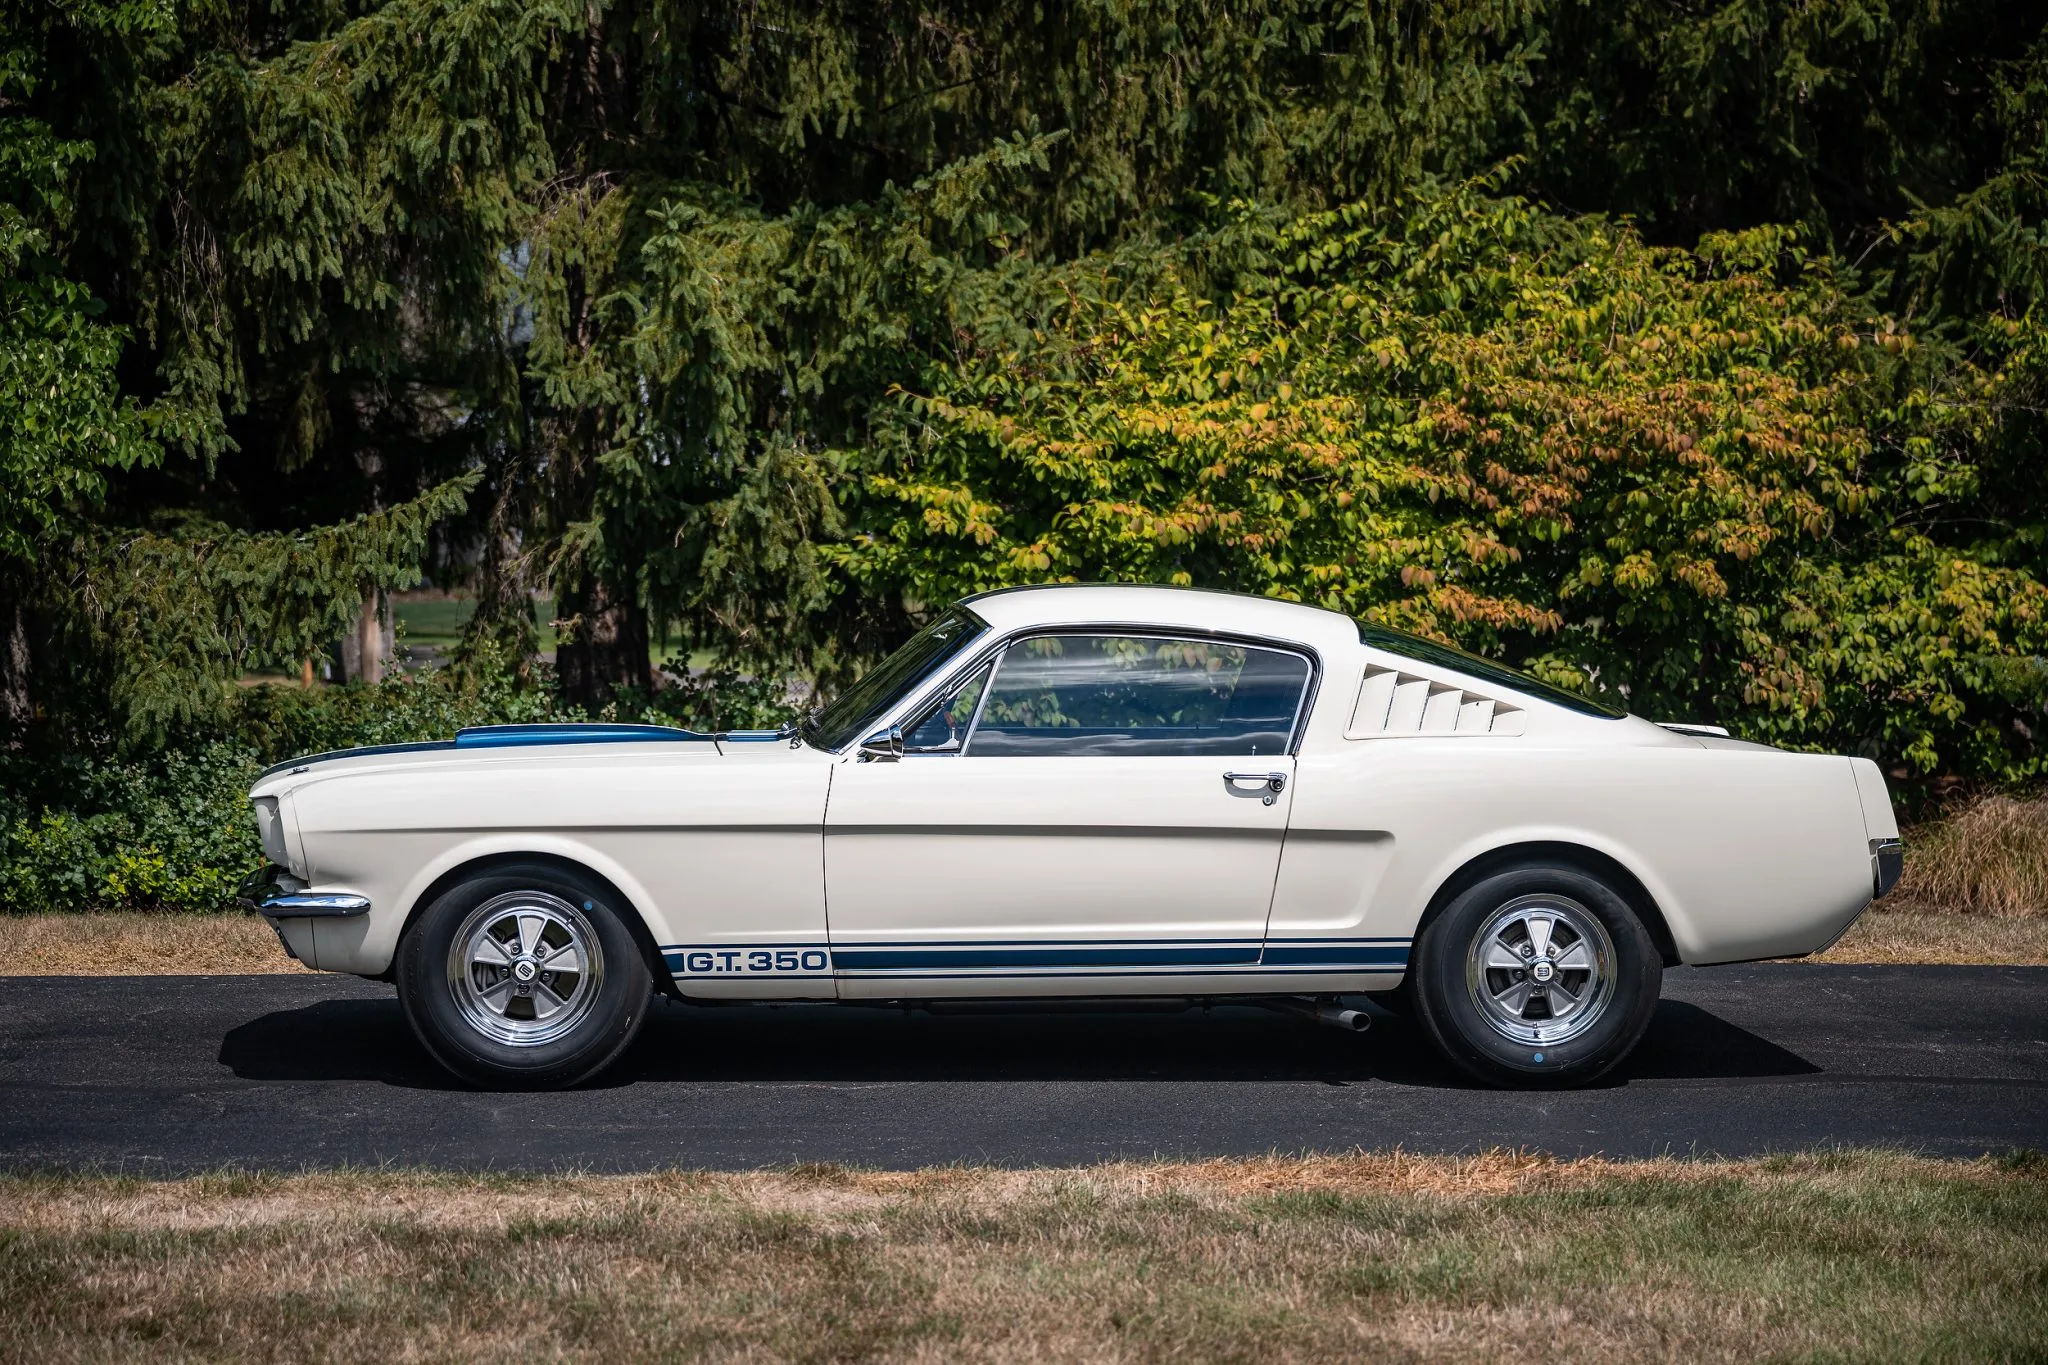 This 1965 Shelby Mustang GT350 Could Be Yours!